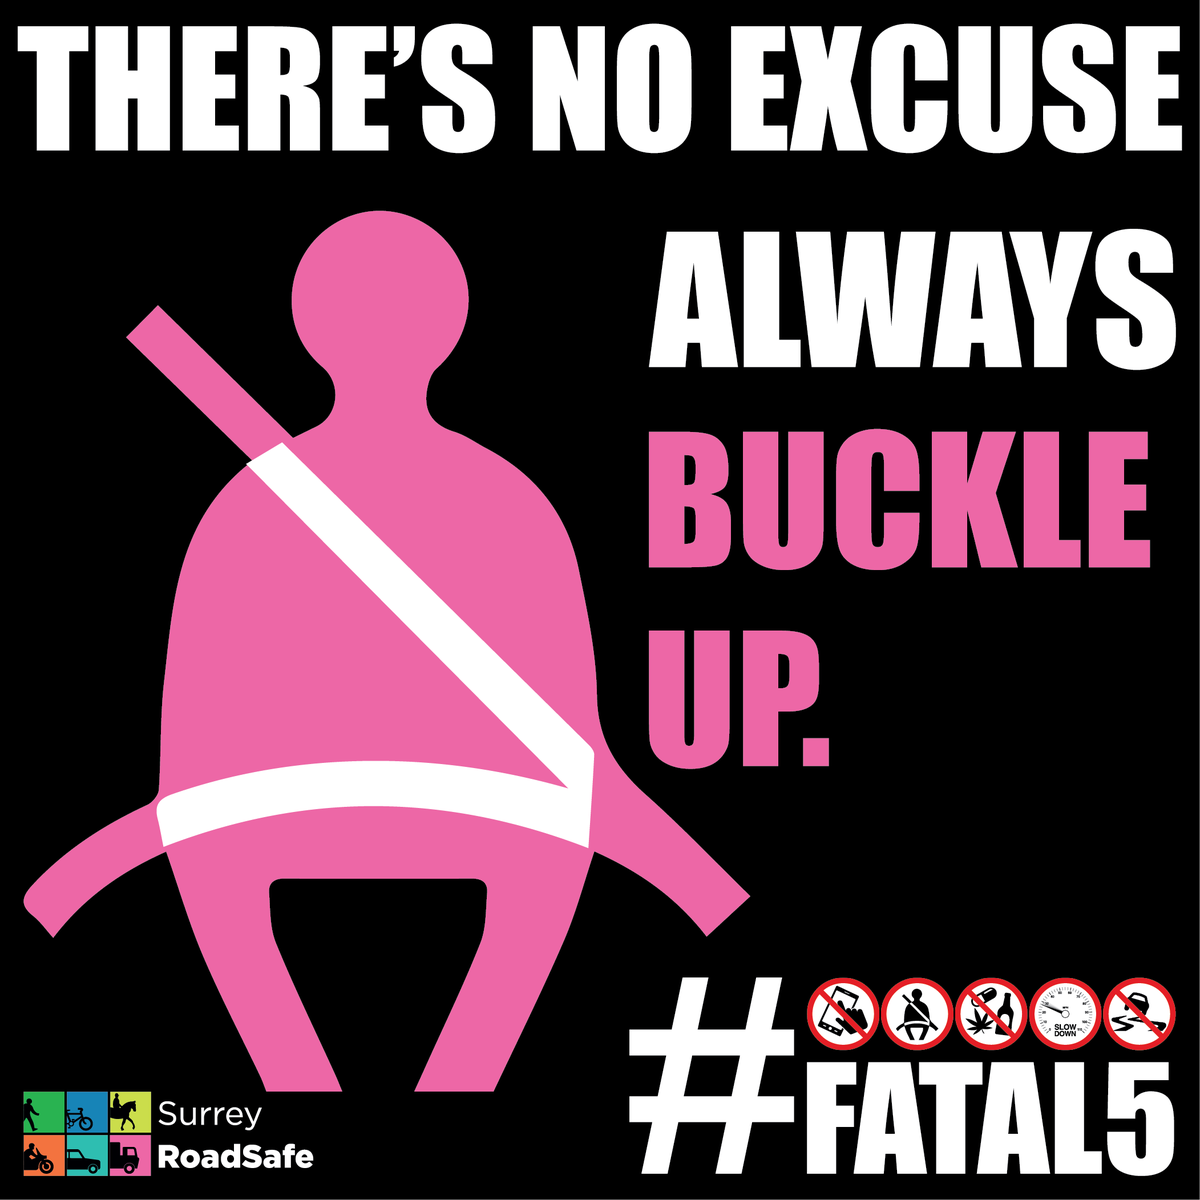 Since 31st Jan 1983 it has been a legal requirement for drivers and passengers (of all ages) to wear a seatbelt. Wearing a seatbelt saves hundreds of lives every year. There is no excuse not to wear one. Always buckle up before heading off. #Fatal5 #opfatalfails